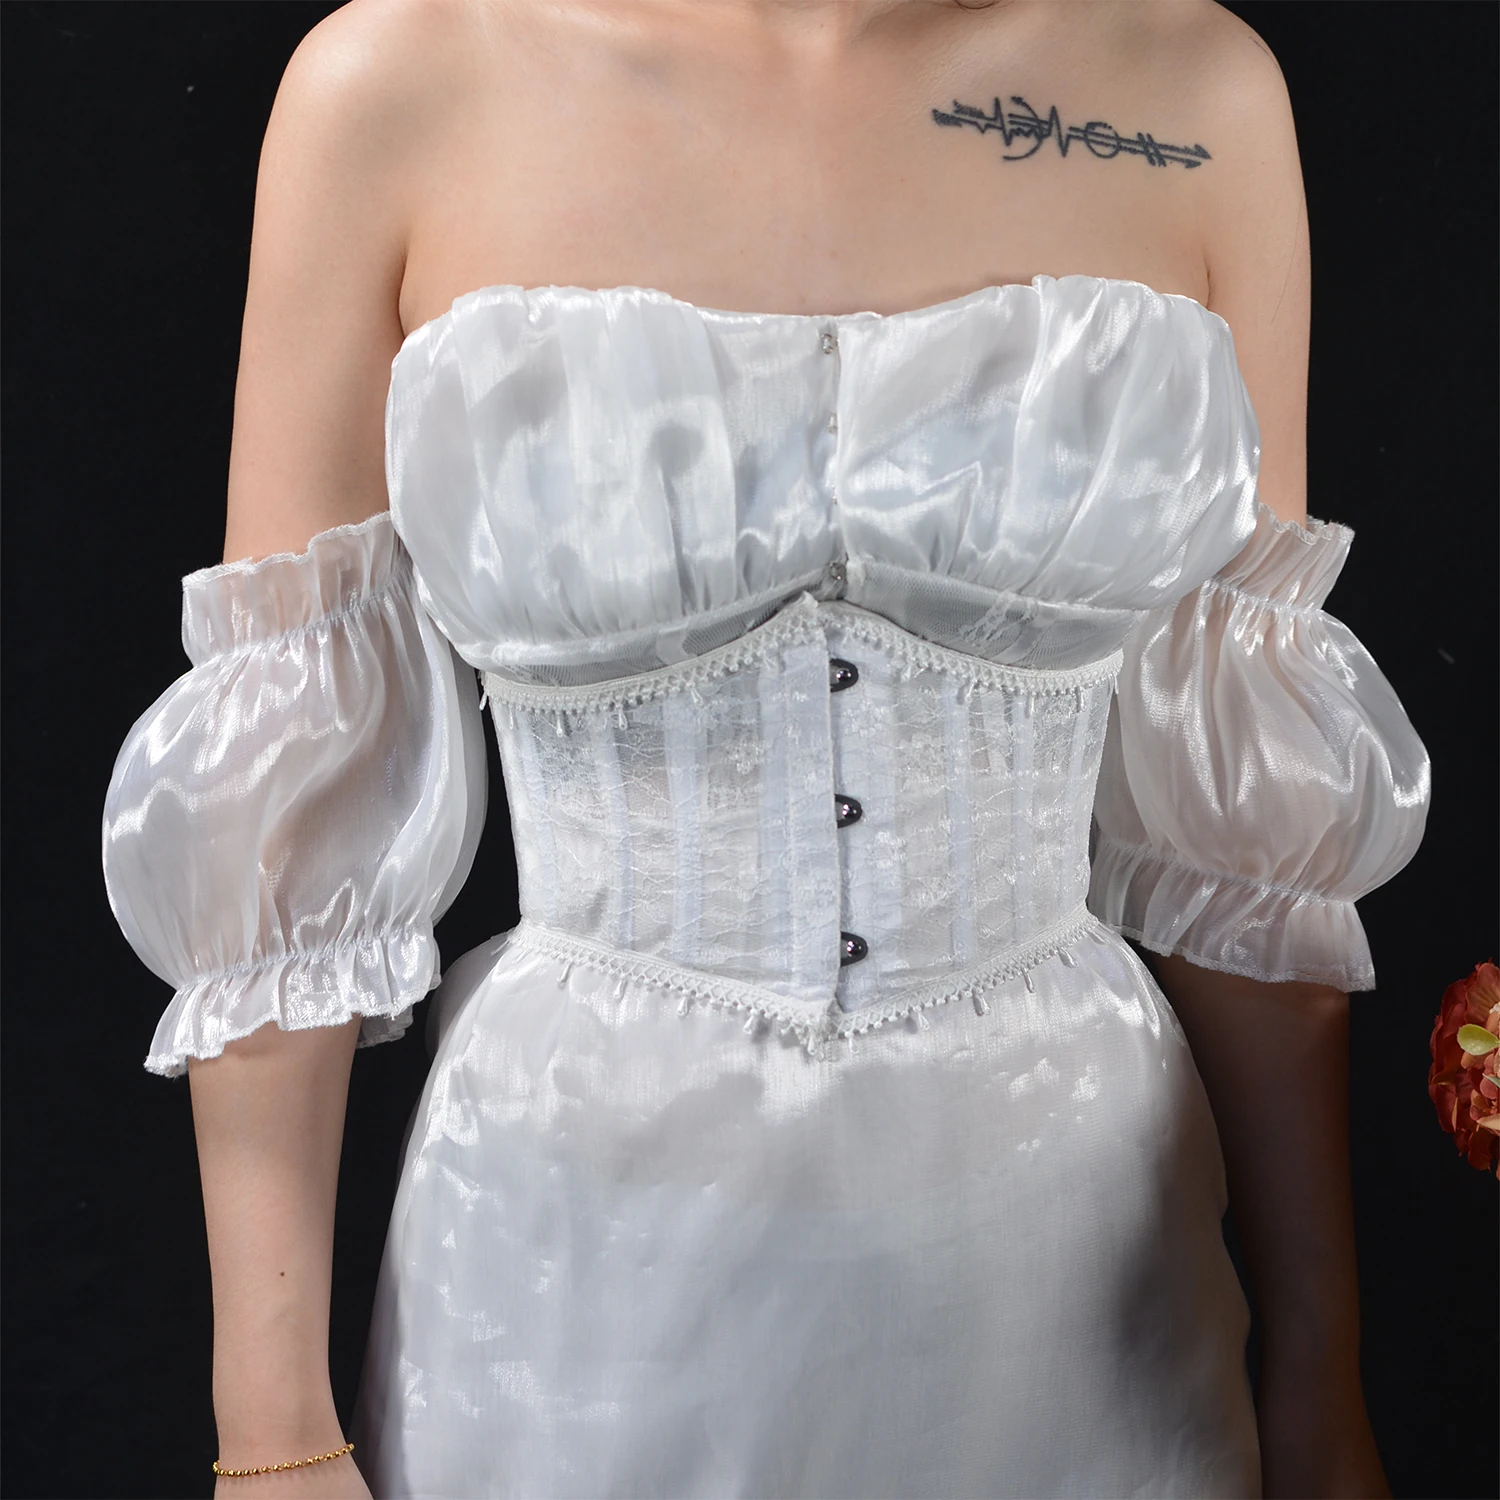 https://ae01.alicdn.com/kf/Secbc018d682e4e04a671678b4a28aa71H/6-29inch-Short-Lace-Corsets-Womens-White-Sheer-Lace-Underwire-Open-Cup-Underbust-Corset.jpg